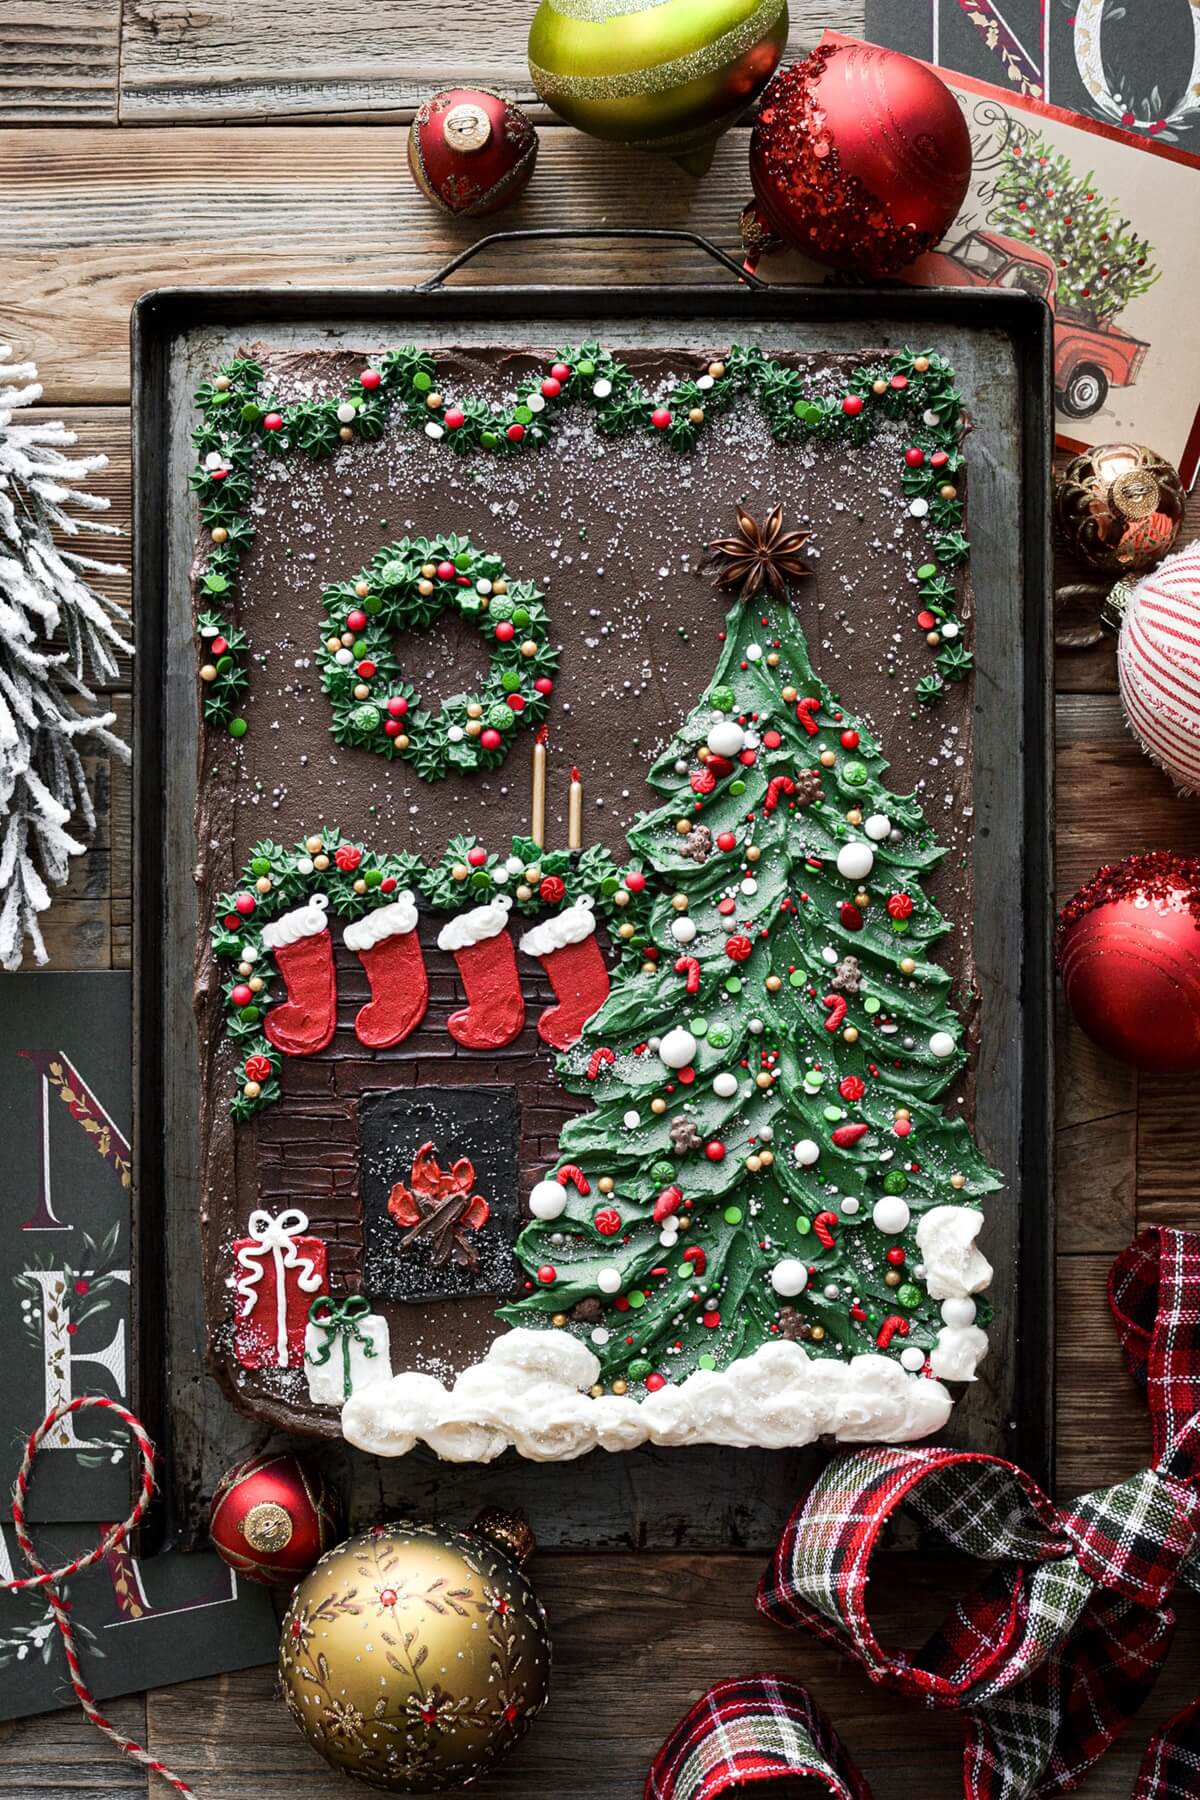 Christmas tree sheet cake with a fireplace, stockings, wreath and garland.